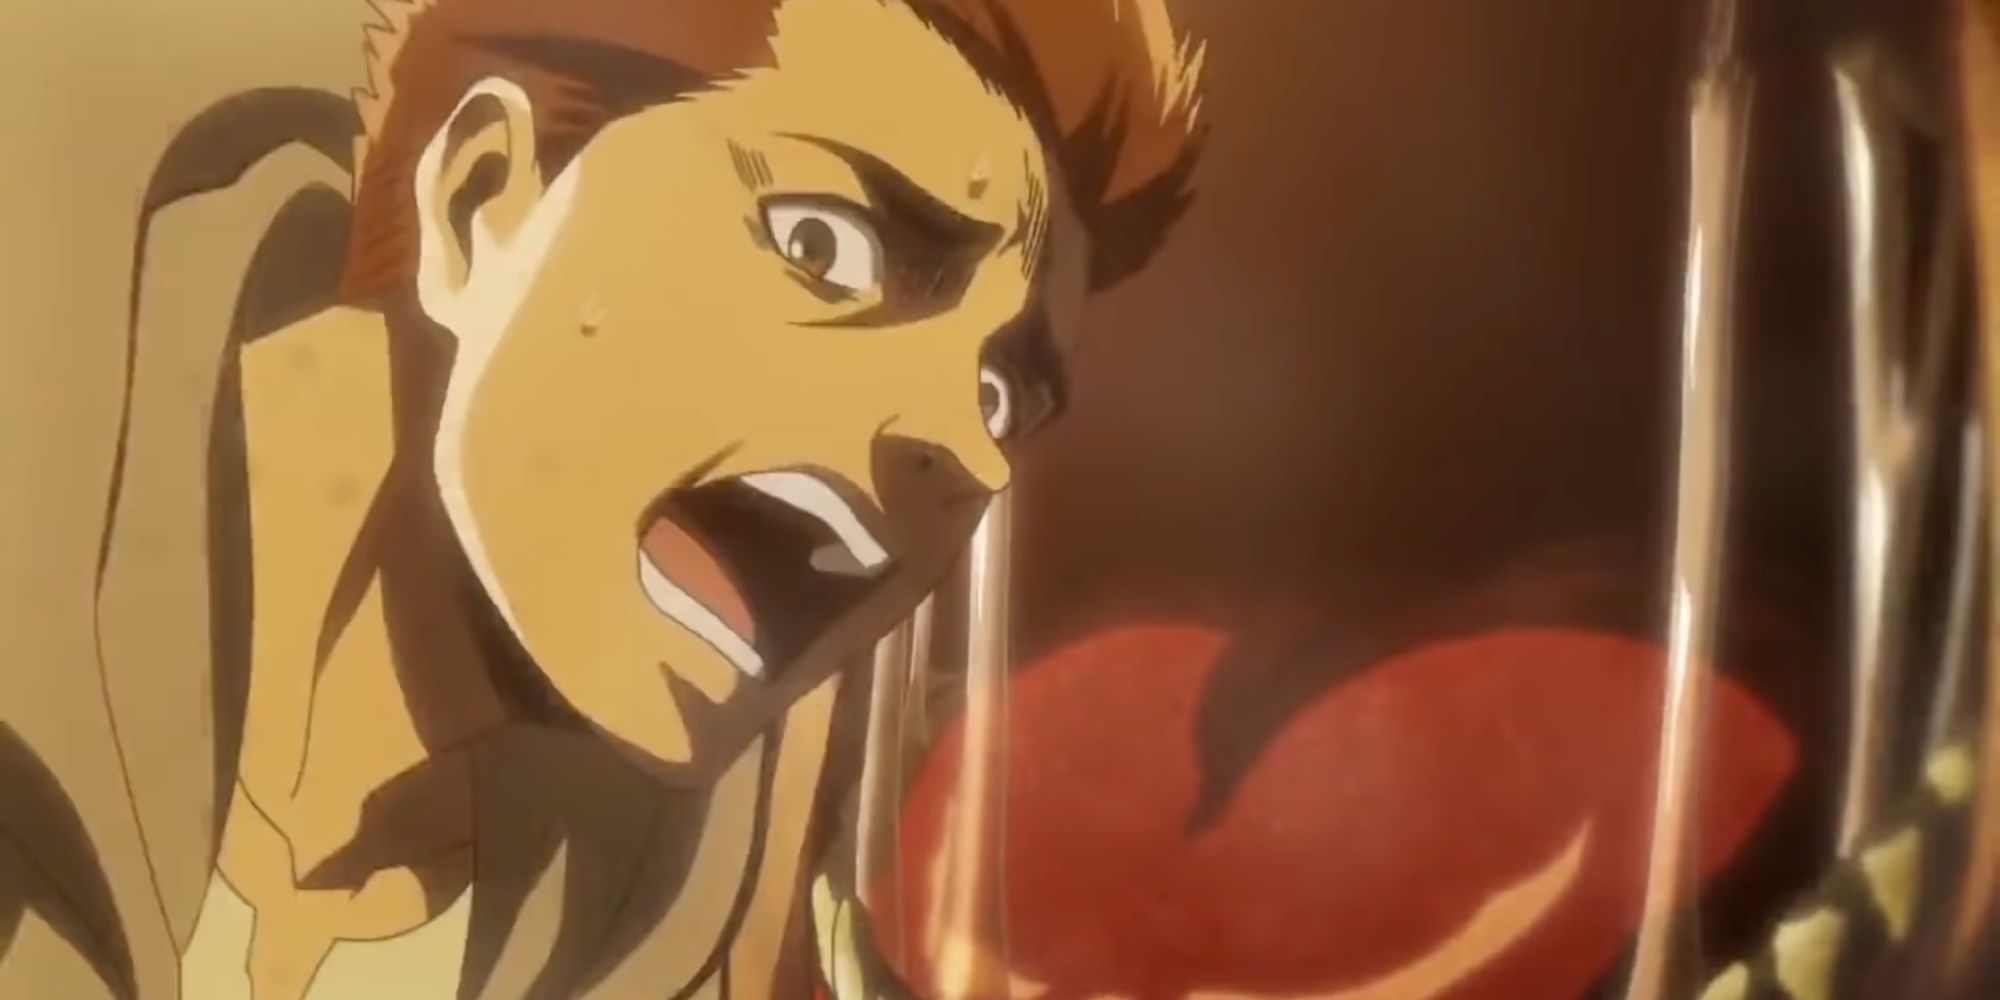 Marcel Galliard with a horrified expression as he is about to be eaten by Ymir in her pure titan form